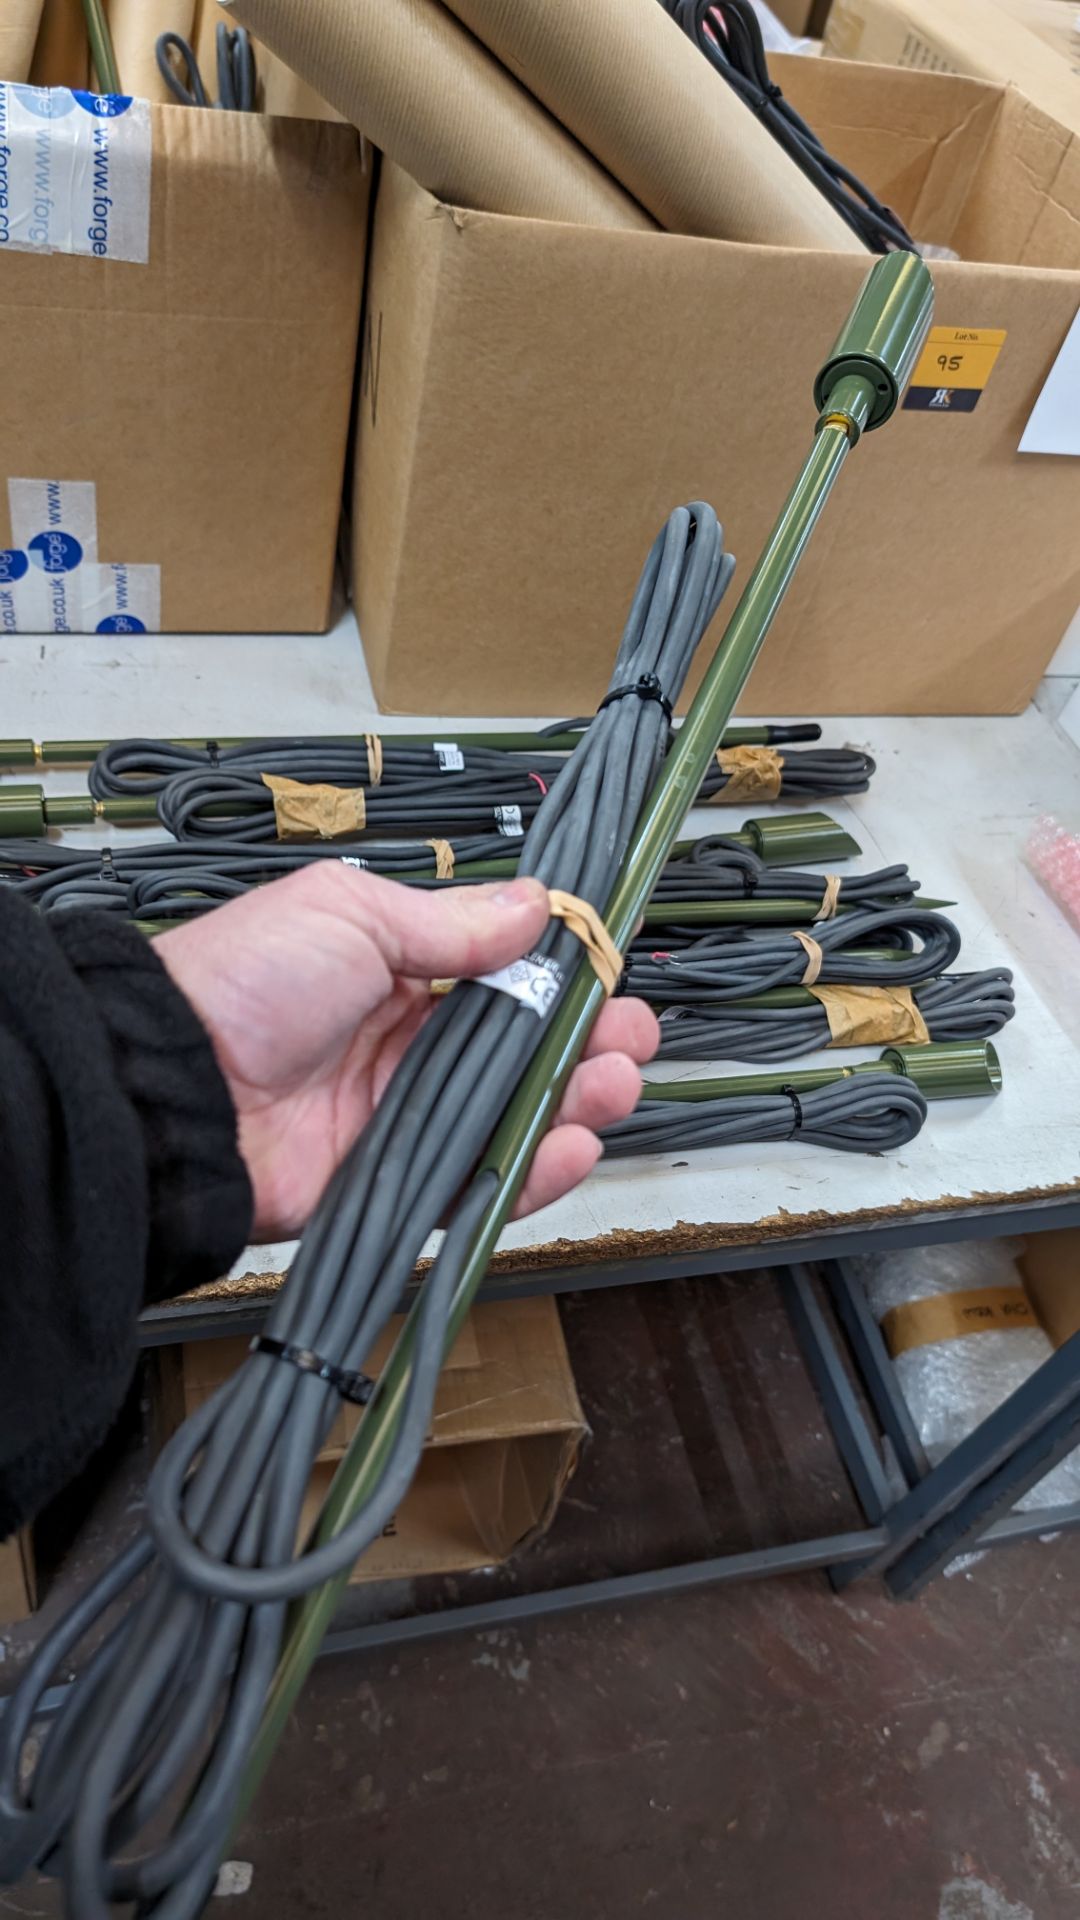 10 off Kew garden spike fittings in olive green - Image 6 of 7